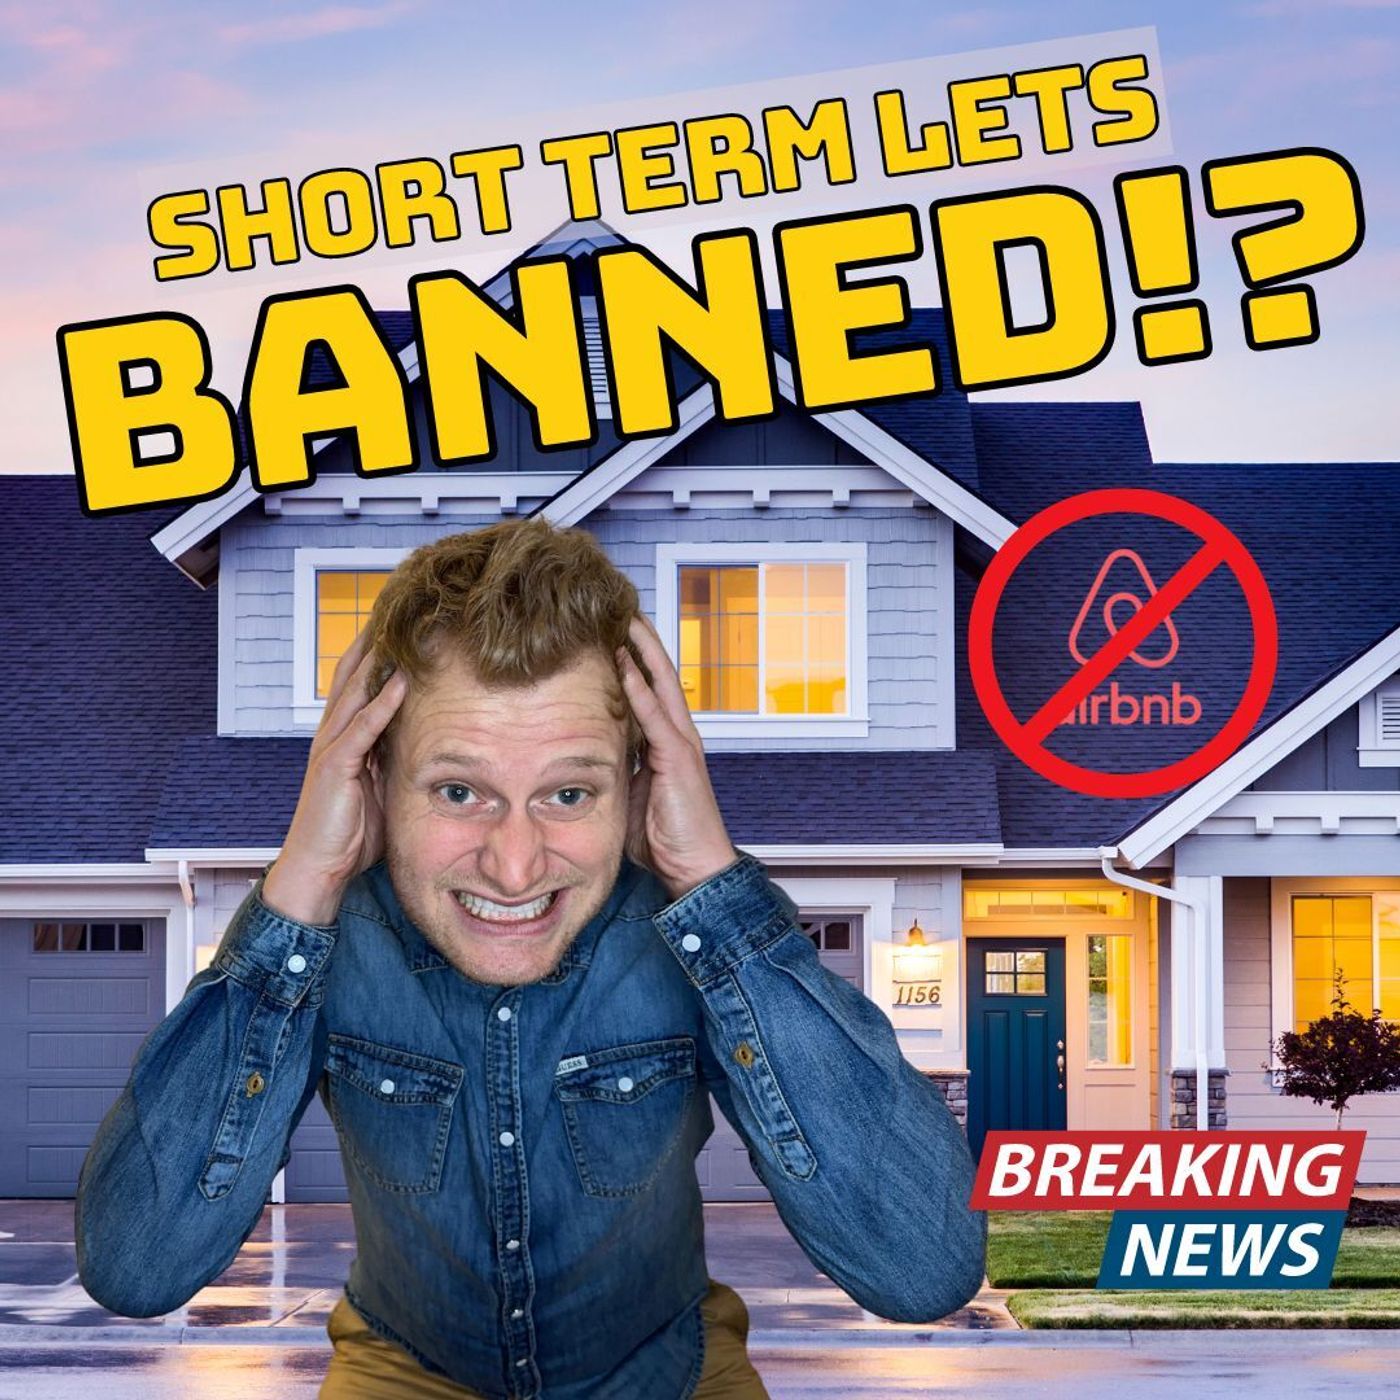 Government Announcement: On Short Terms Let's - Is this the END of Airbnb?